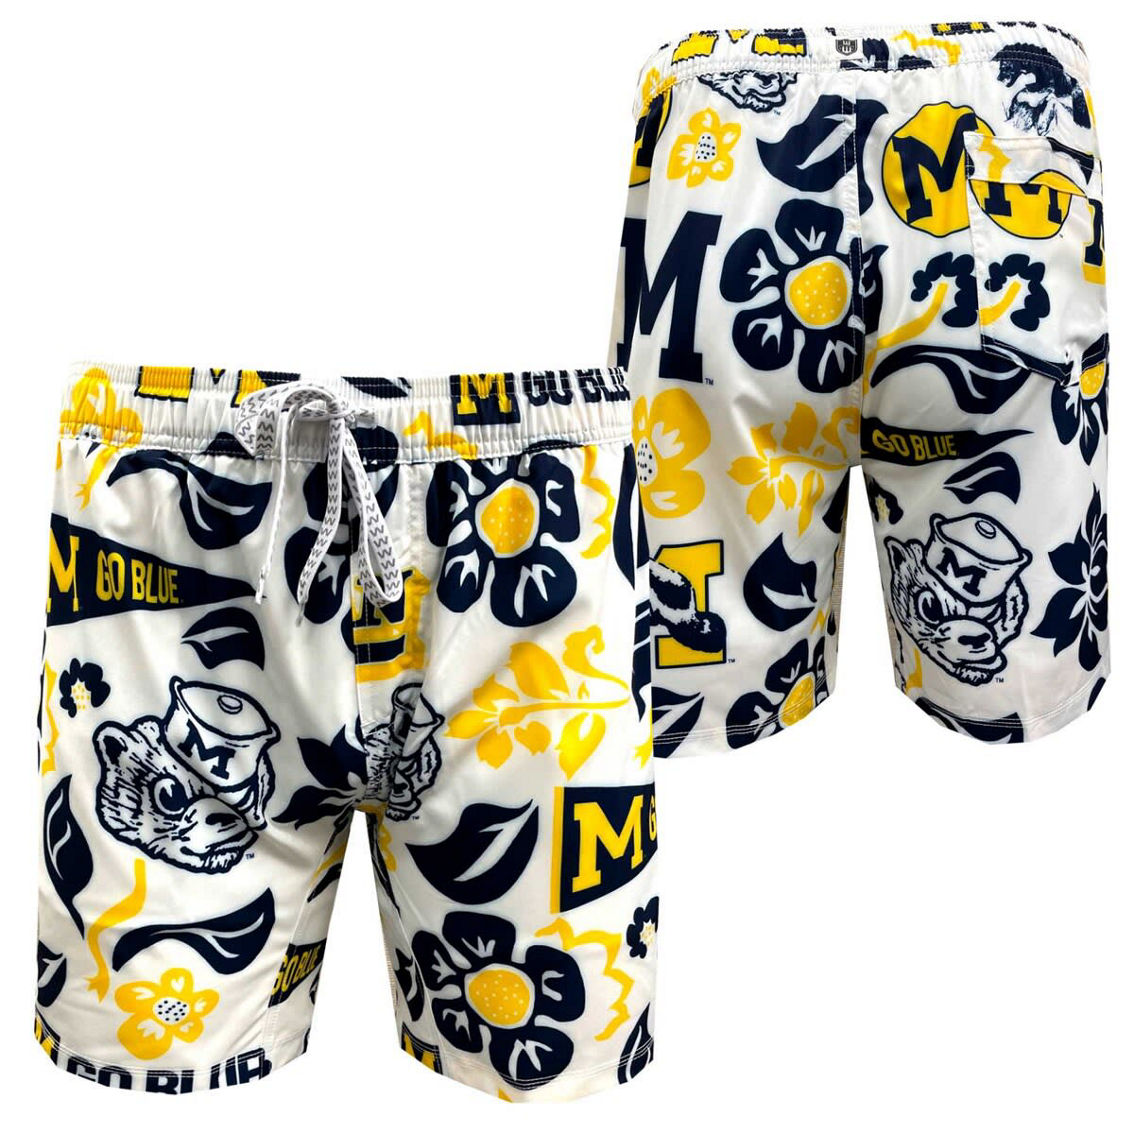 Wes & Willy Youth White Michigan Wolverines Allover Print Vault Tech Swim Trunks - Image 2 of 2